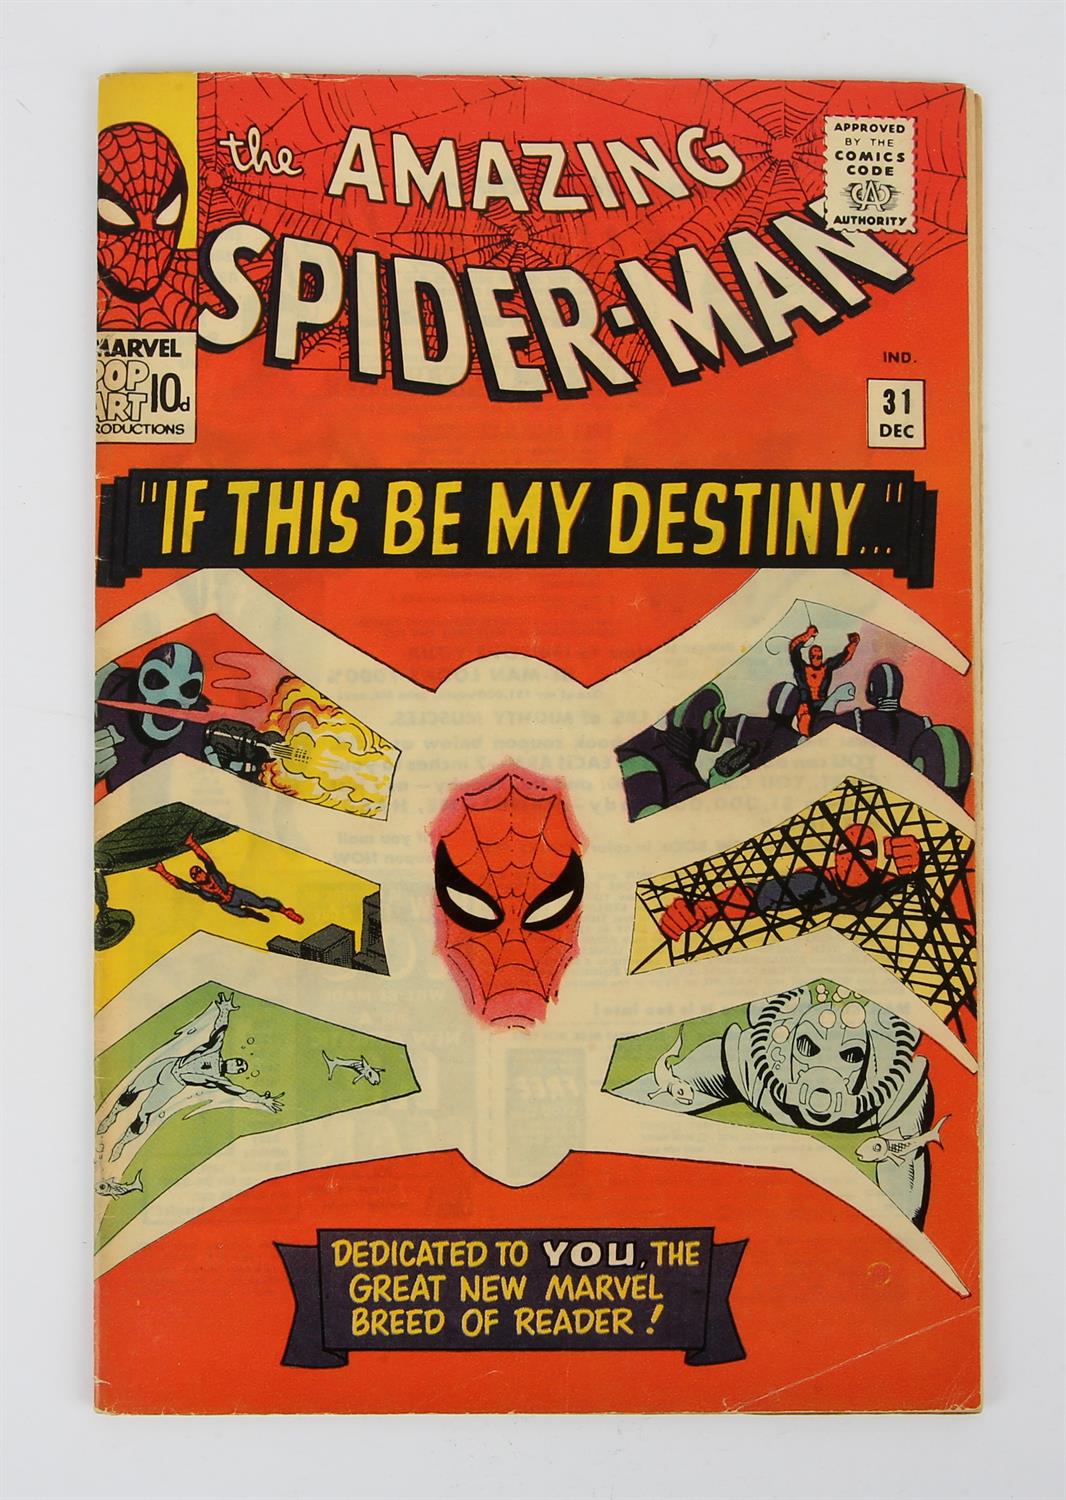 Marvel Comics: Amazing Spider-Man No. 31 featuring the 1st appearance of Gwen Stacey and Harry